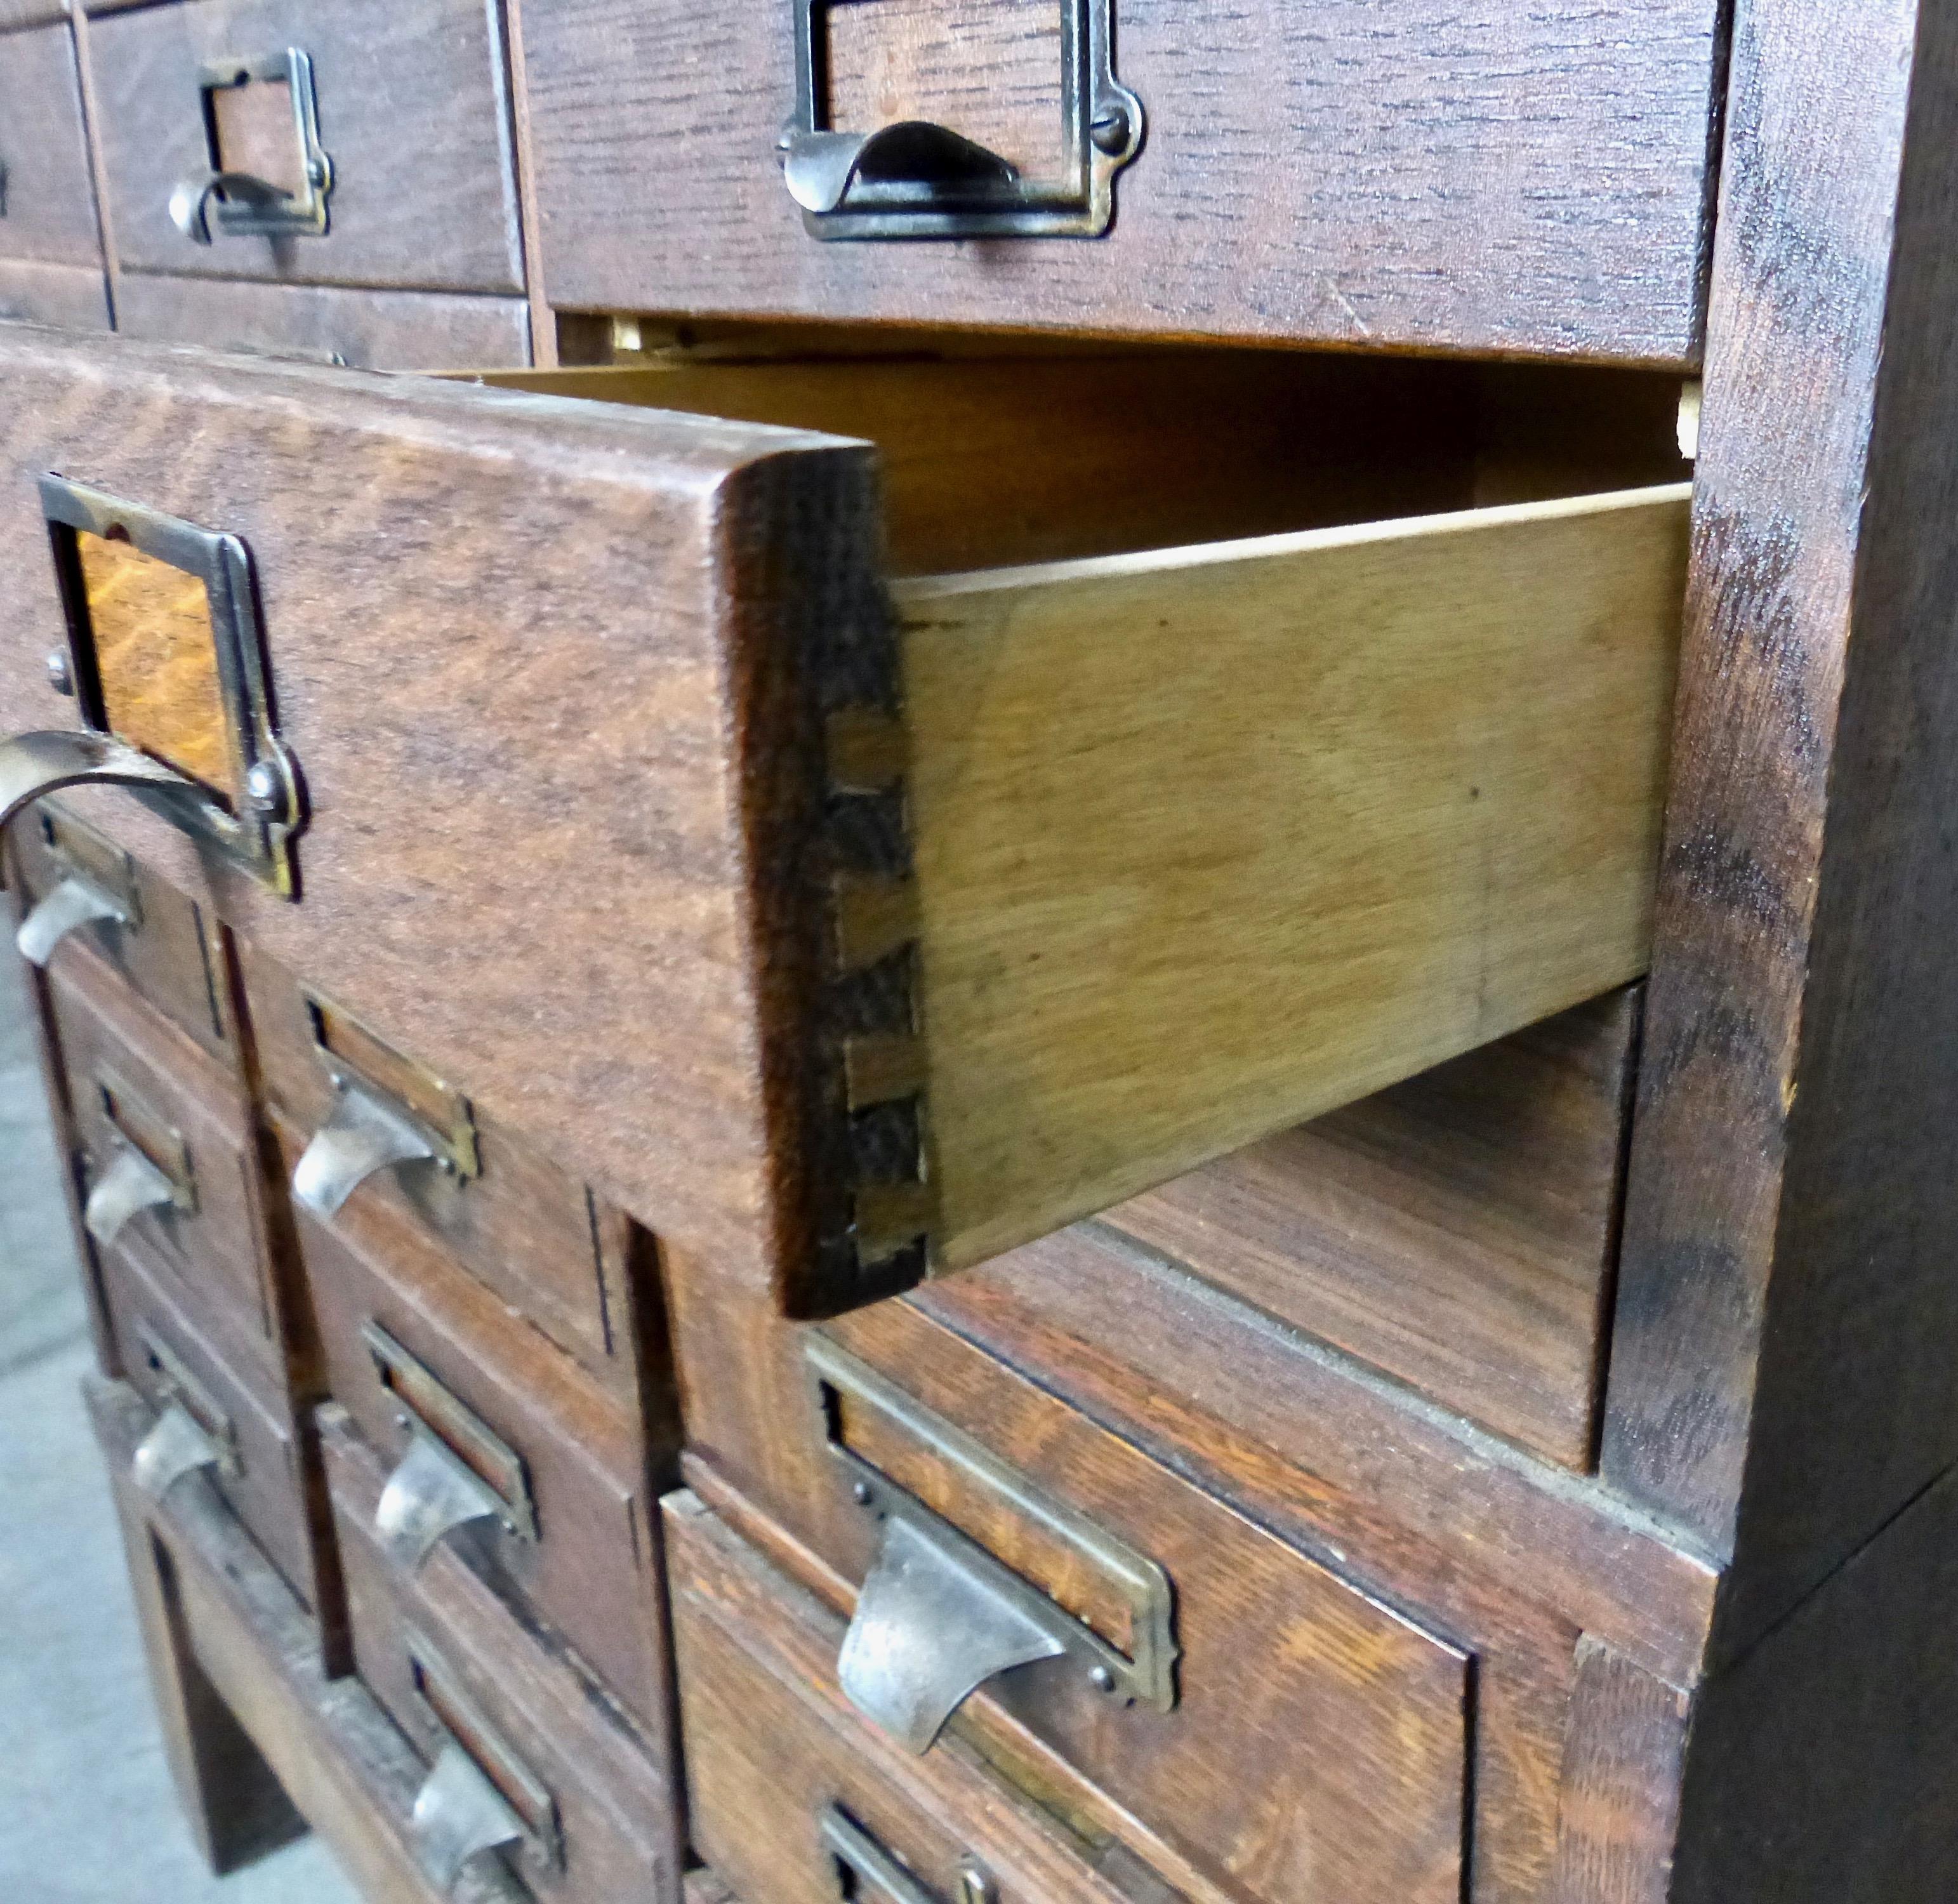 Cleverly designed with individual mix-and-match modules, this oak apothecary cabinet is completely intact (a rarity). Made by The Office Specialty Co., in Newmarket, Ontario, it not only retains its original brass label; each brass drawer pull is